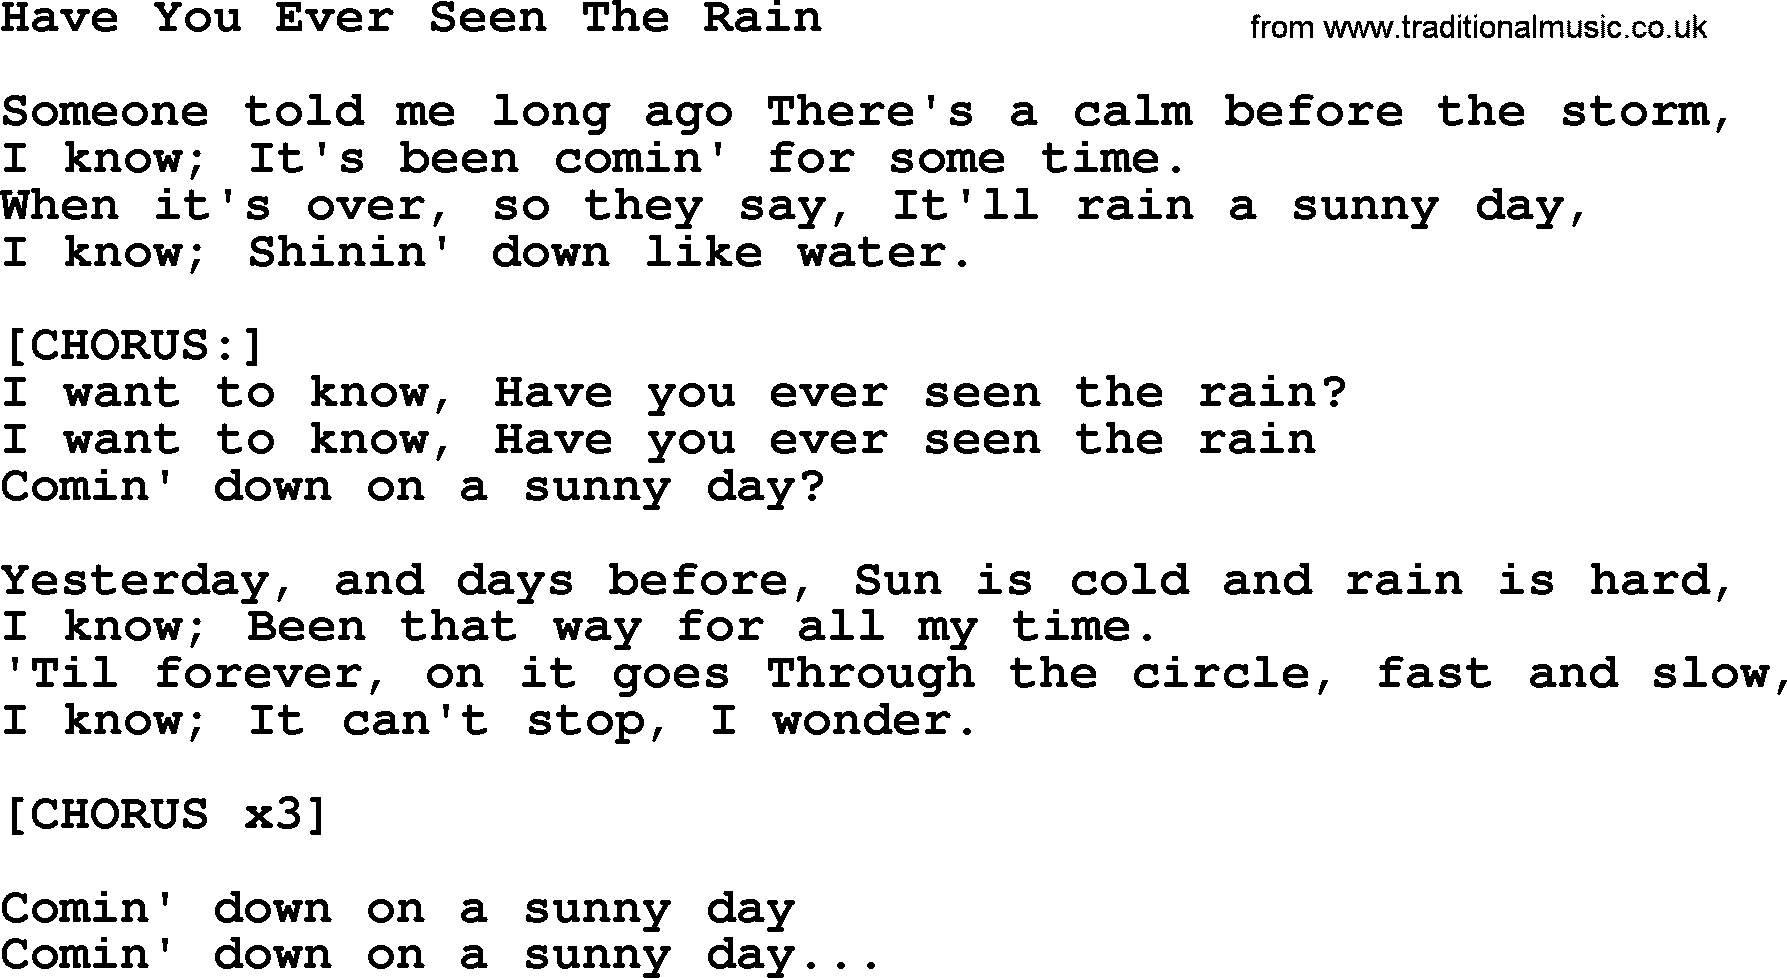 Have You Ever Seen The Rain Chords Willie Nelson Song Have You Ever Seen The Rain Lyrics